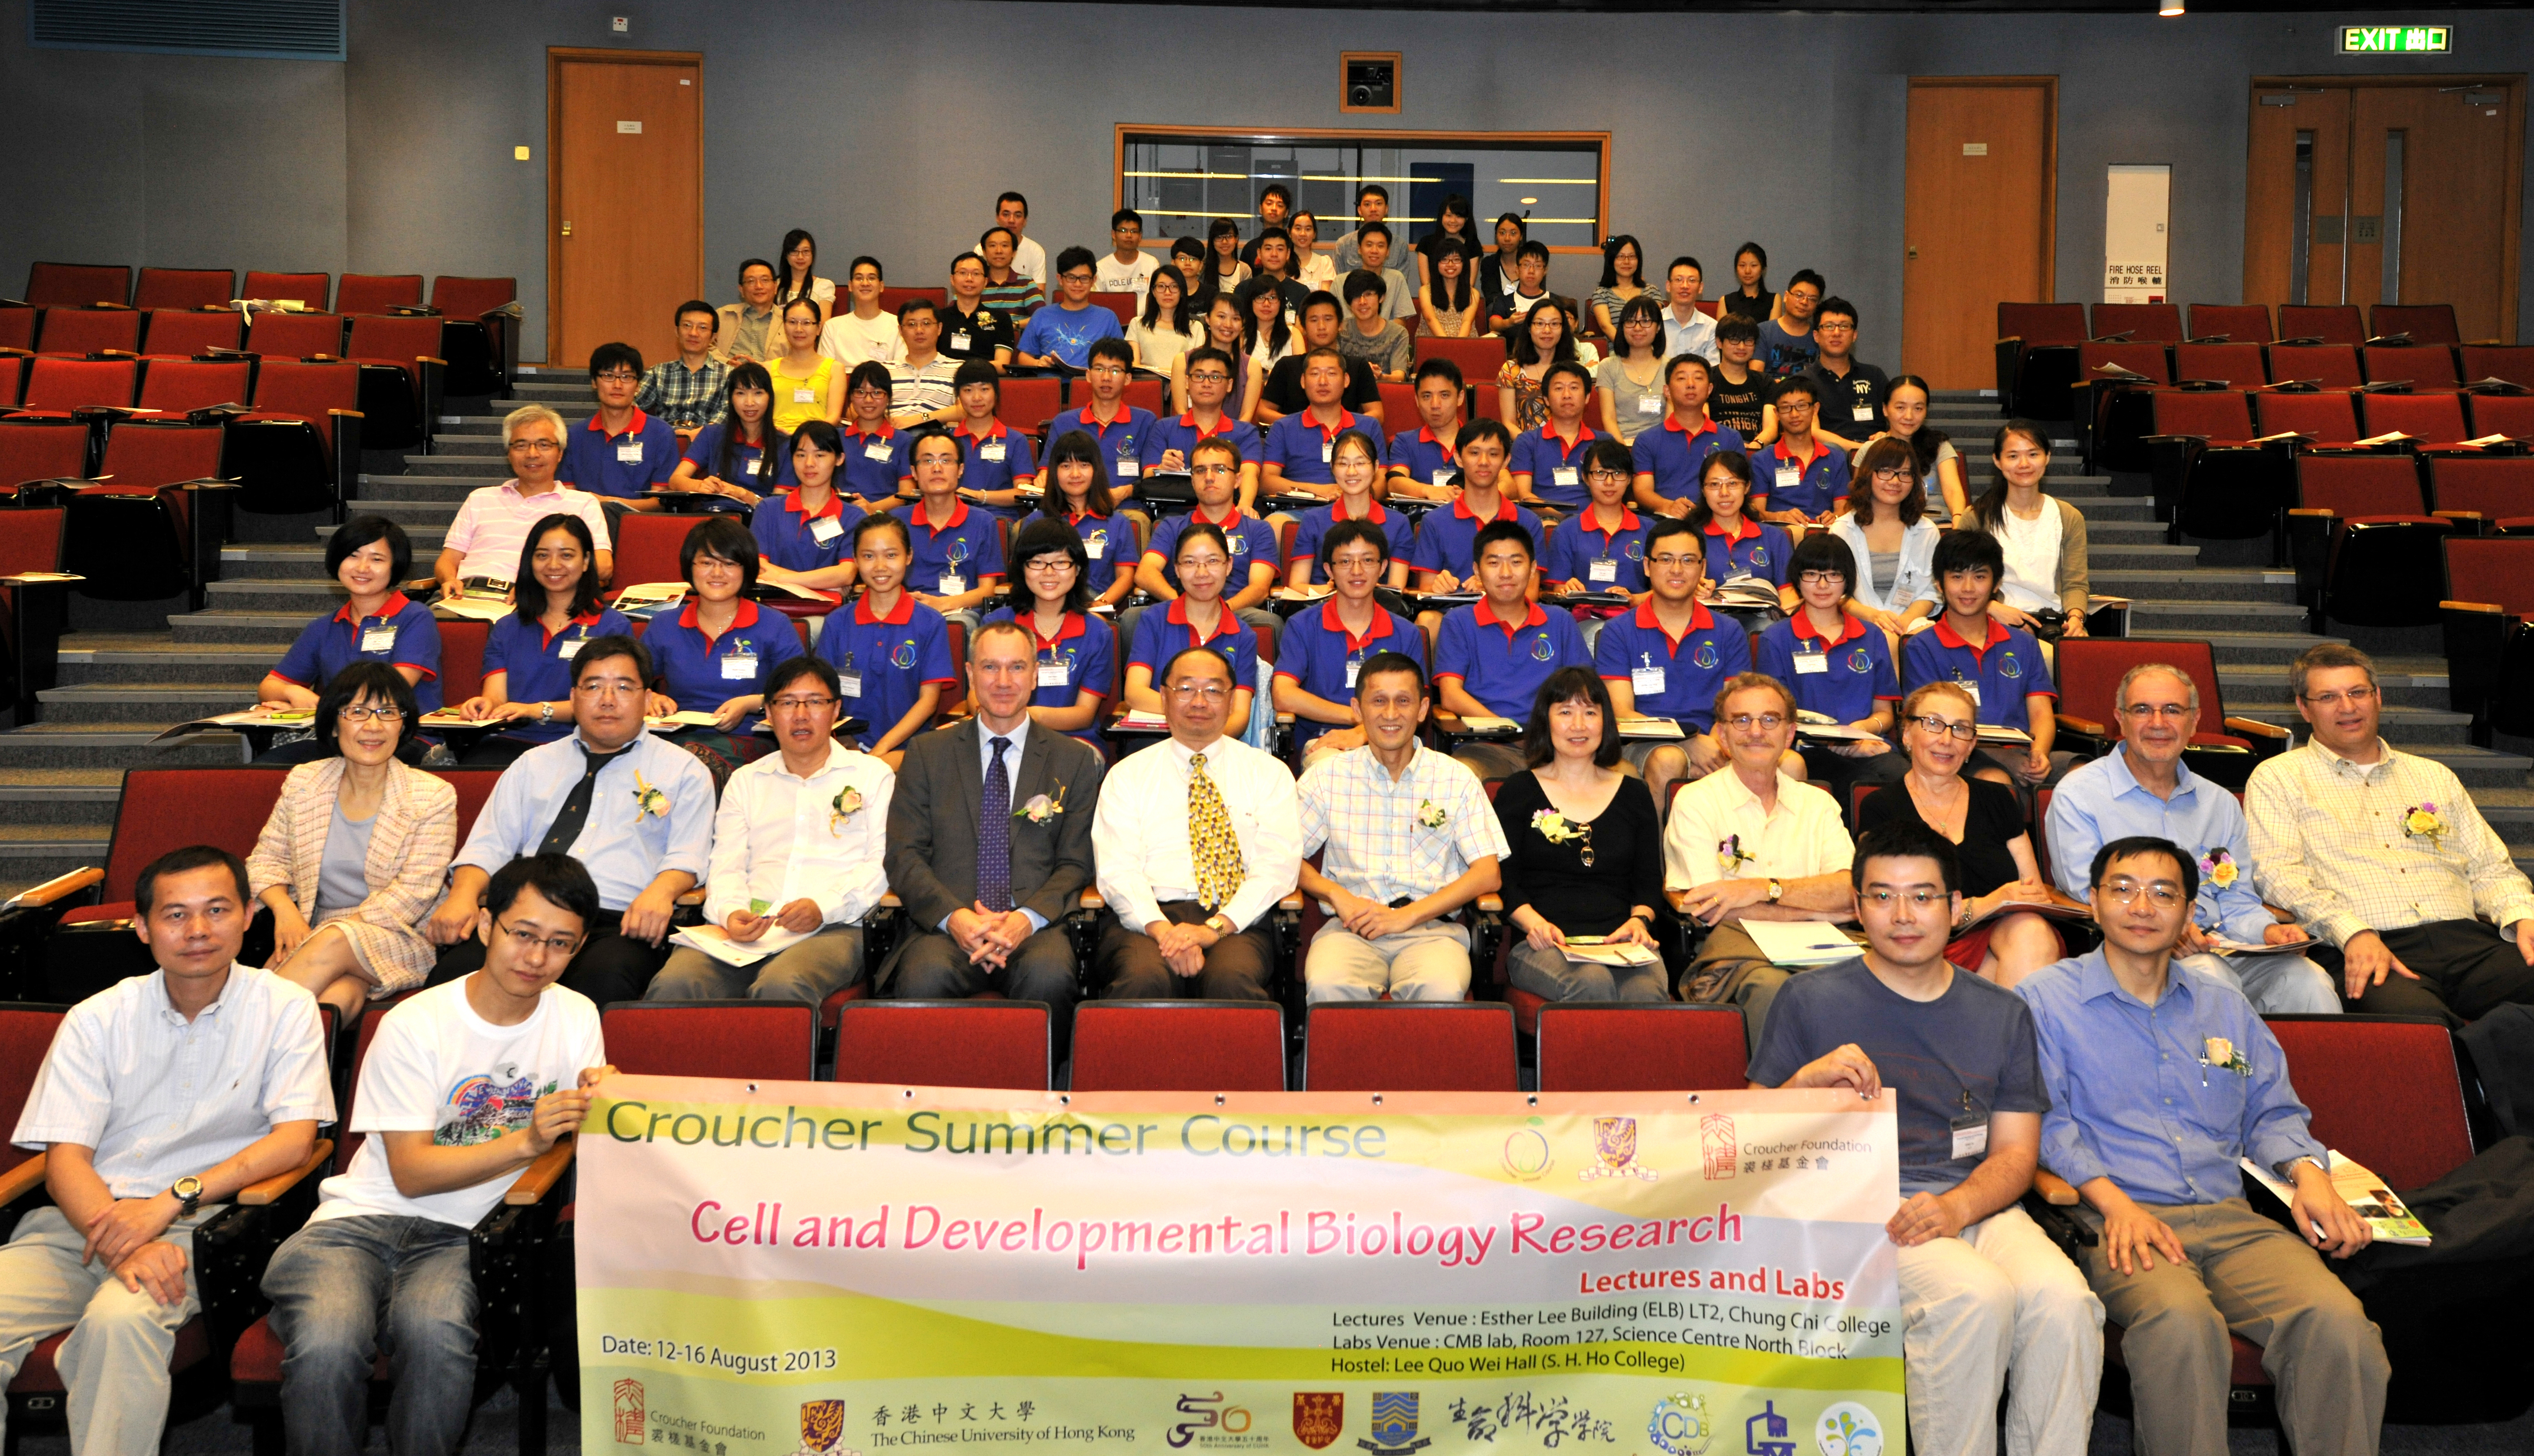 Croucher Summer Course 2013 - Group Photo at Hall